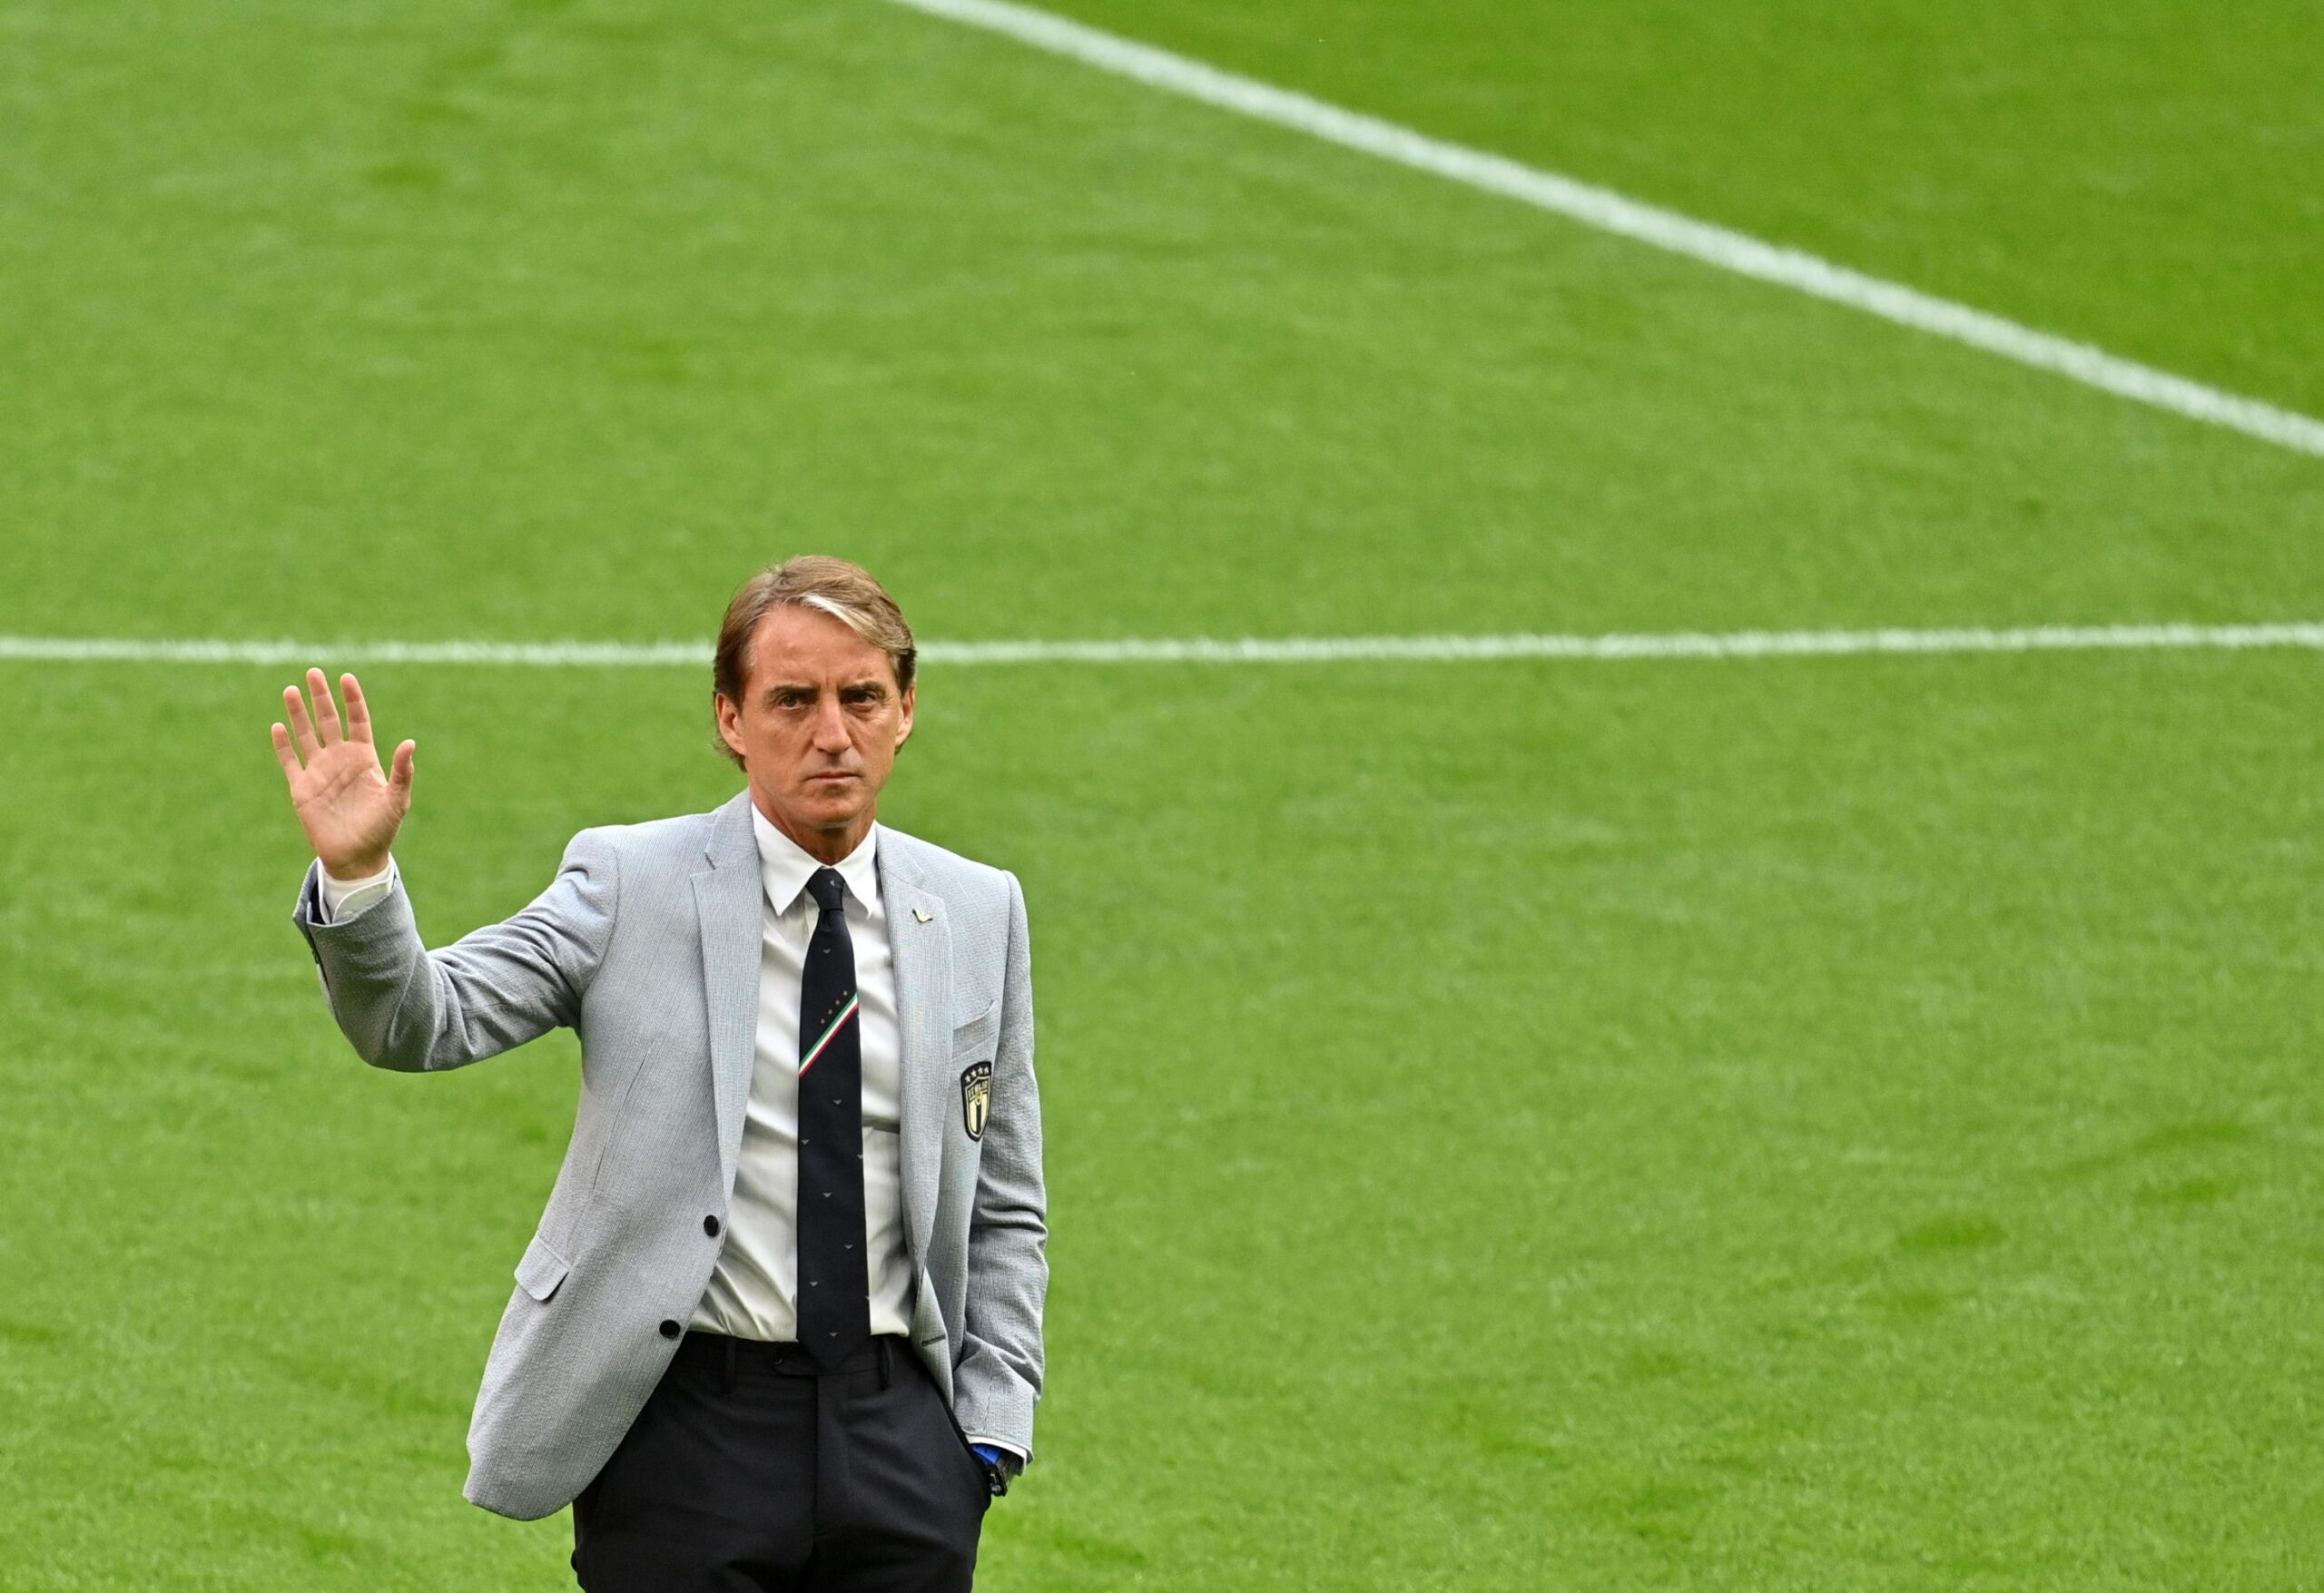 Italy's head coach Roberto Mancini inspects the pitch prior to the UEFA EURO 2020 round of 16 soccer match between Italy and Austria in London, Britain, 26 June 2021. ANSA/Justin Tallis / POOL